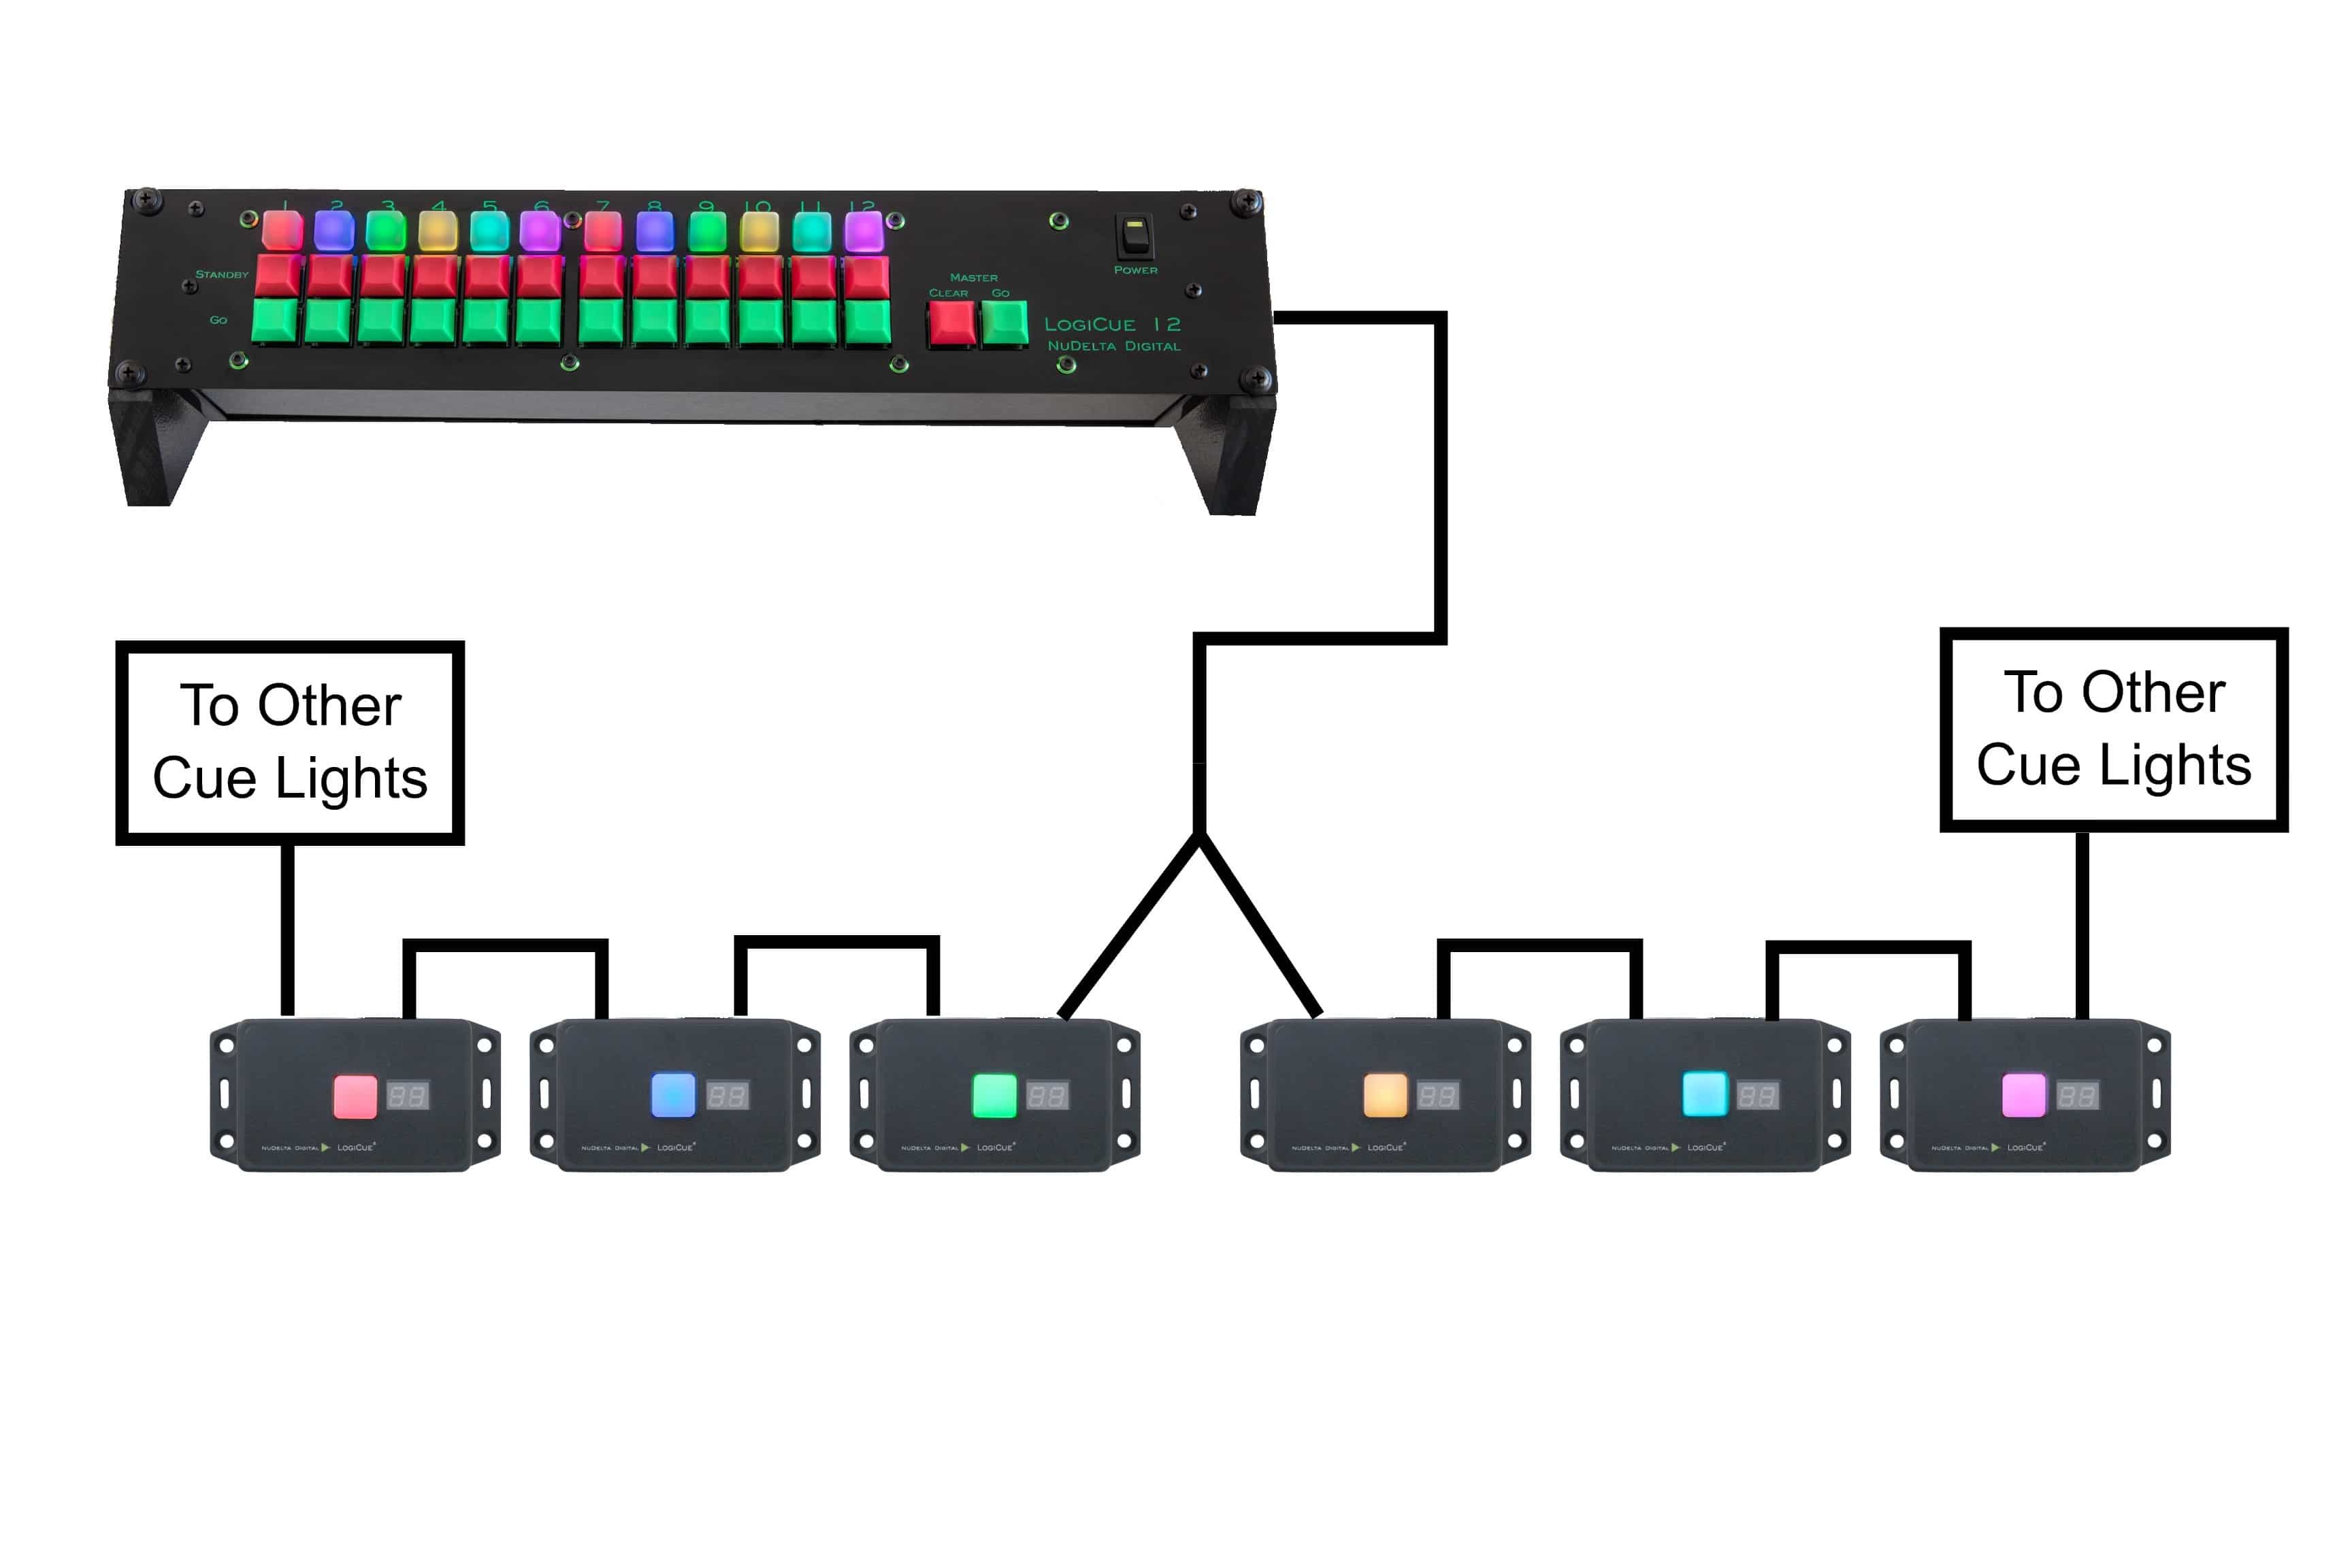 The LogiCue LC12 Digital Cue Light Controller, wiring diagram, part of the LogiCue System of cue lights. The image illustrates cue lights wired in a daisy chain